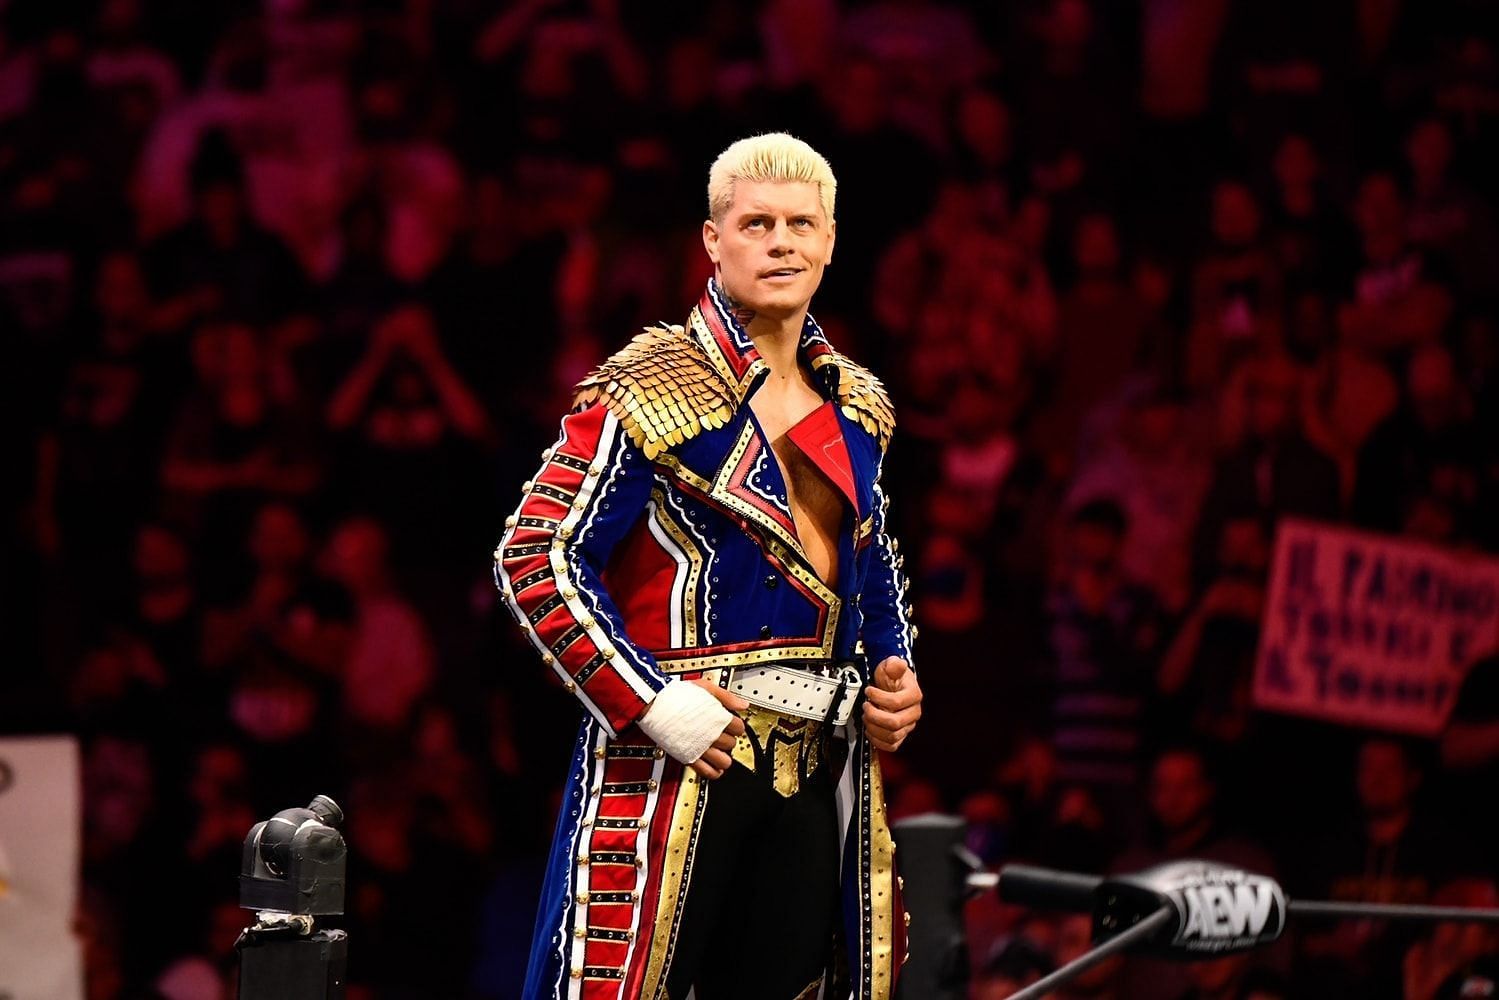 Cody Rhodes is the first AEW player to have left for WWE